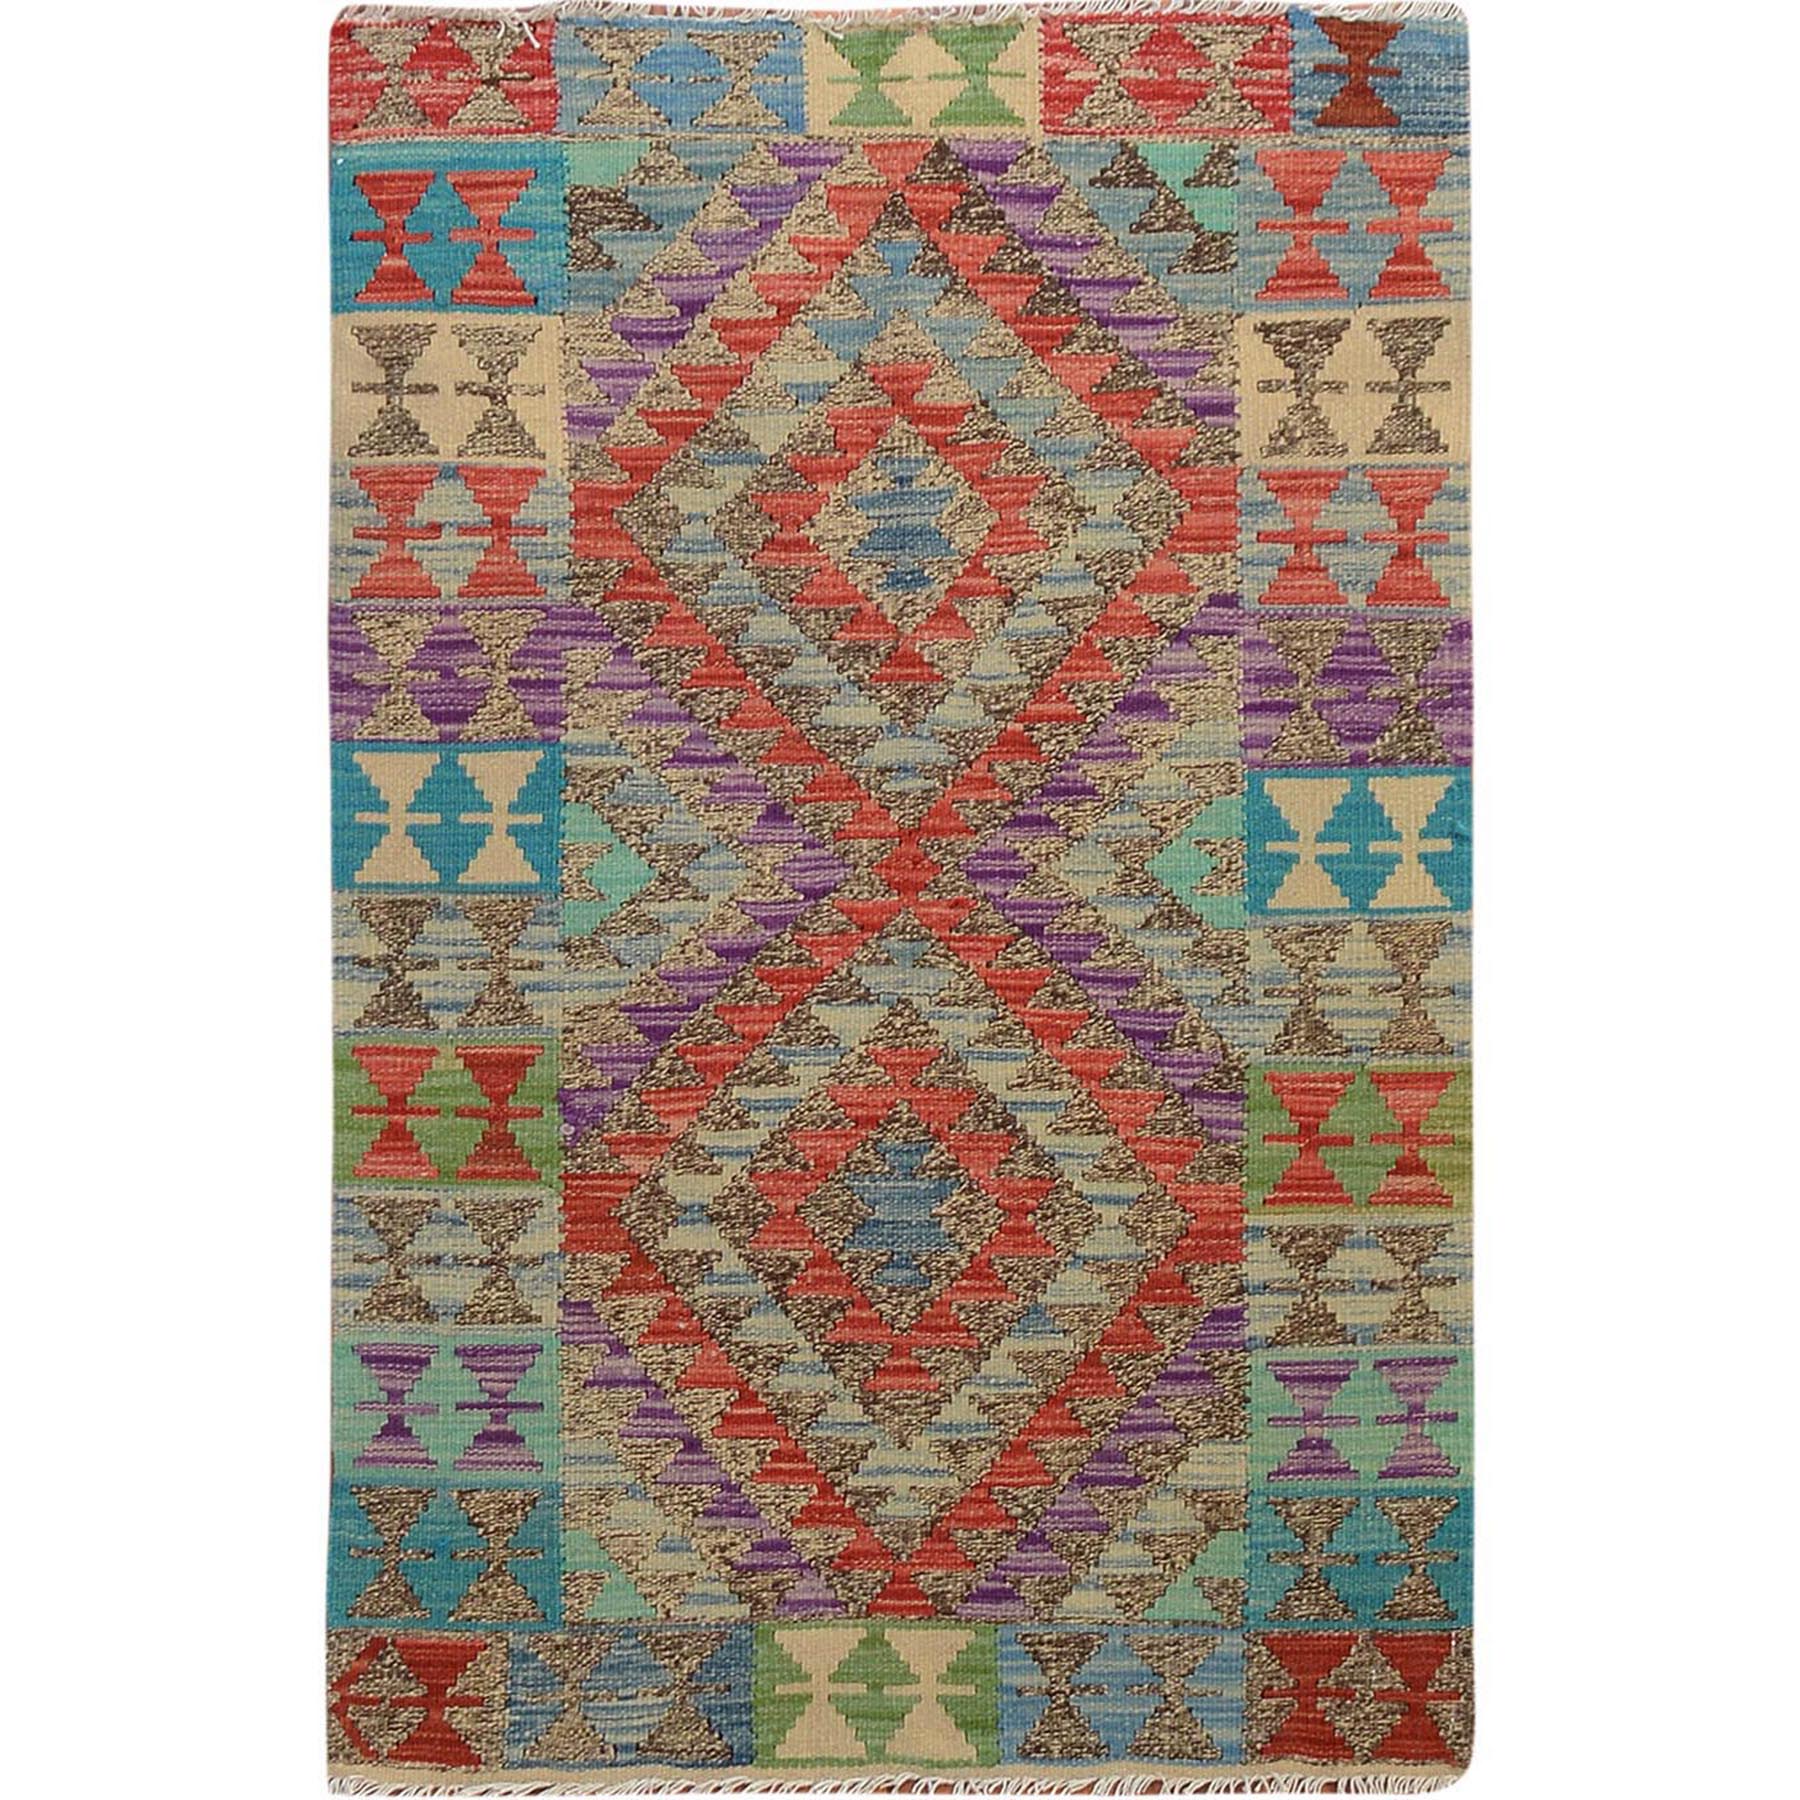 Traditional Wool Hand-Woven Area Rug 2'7